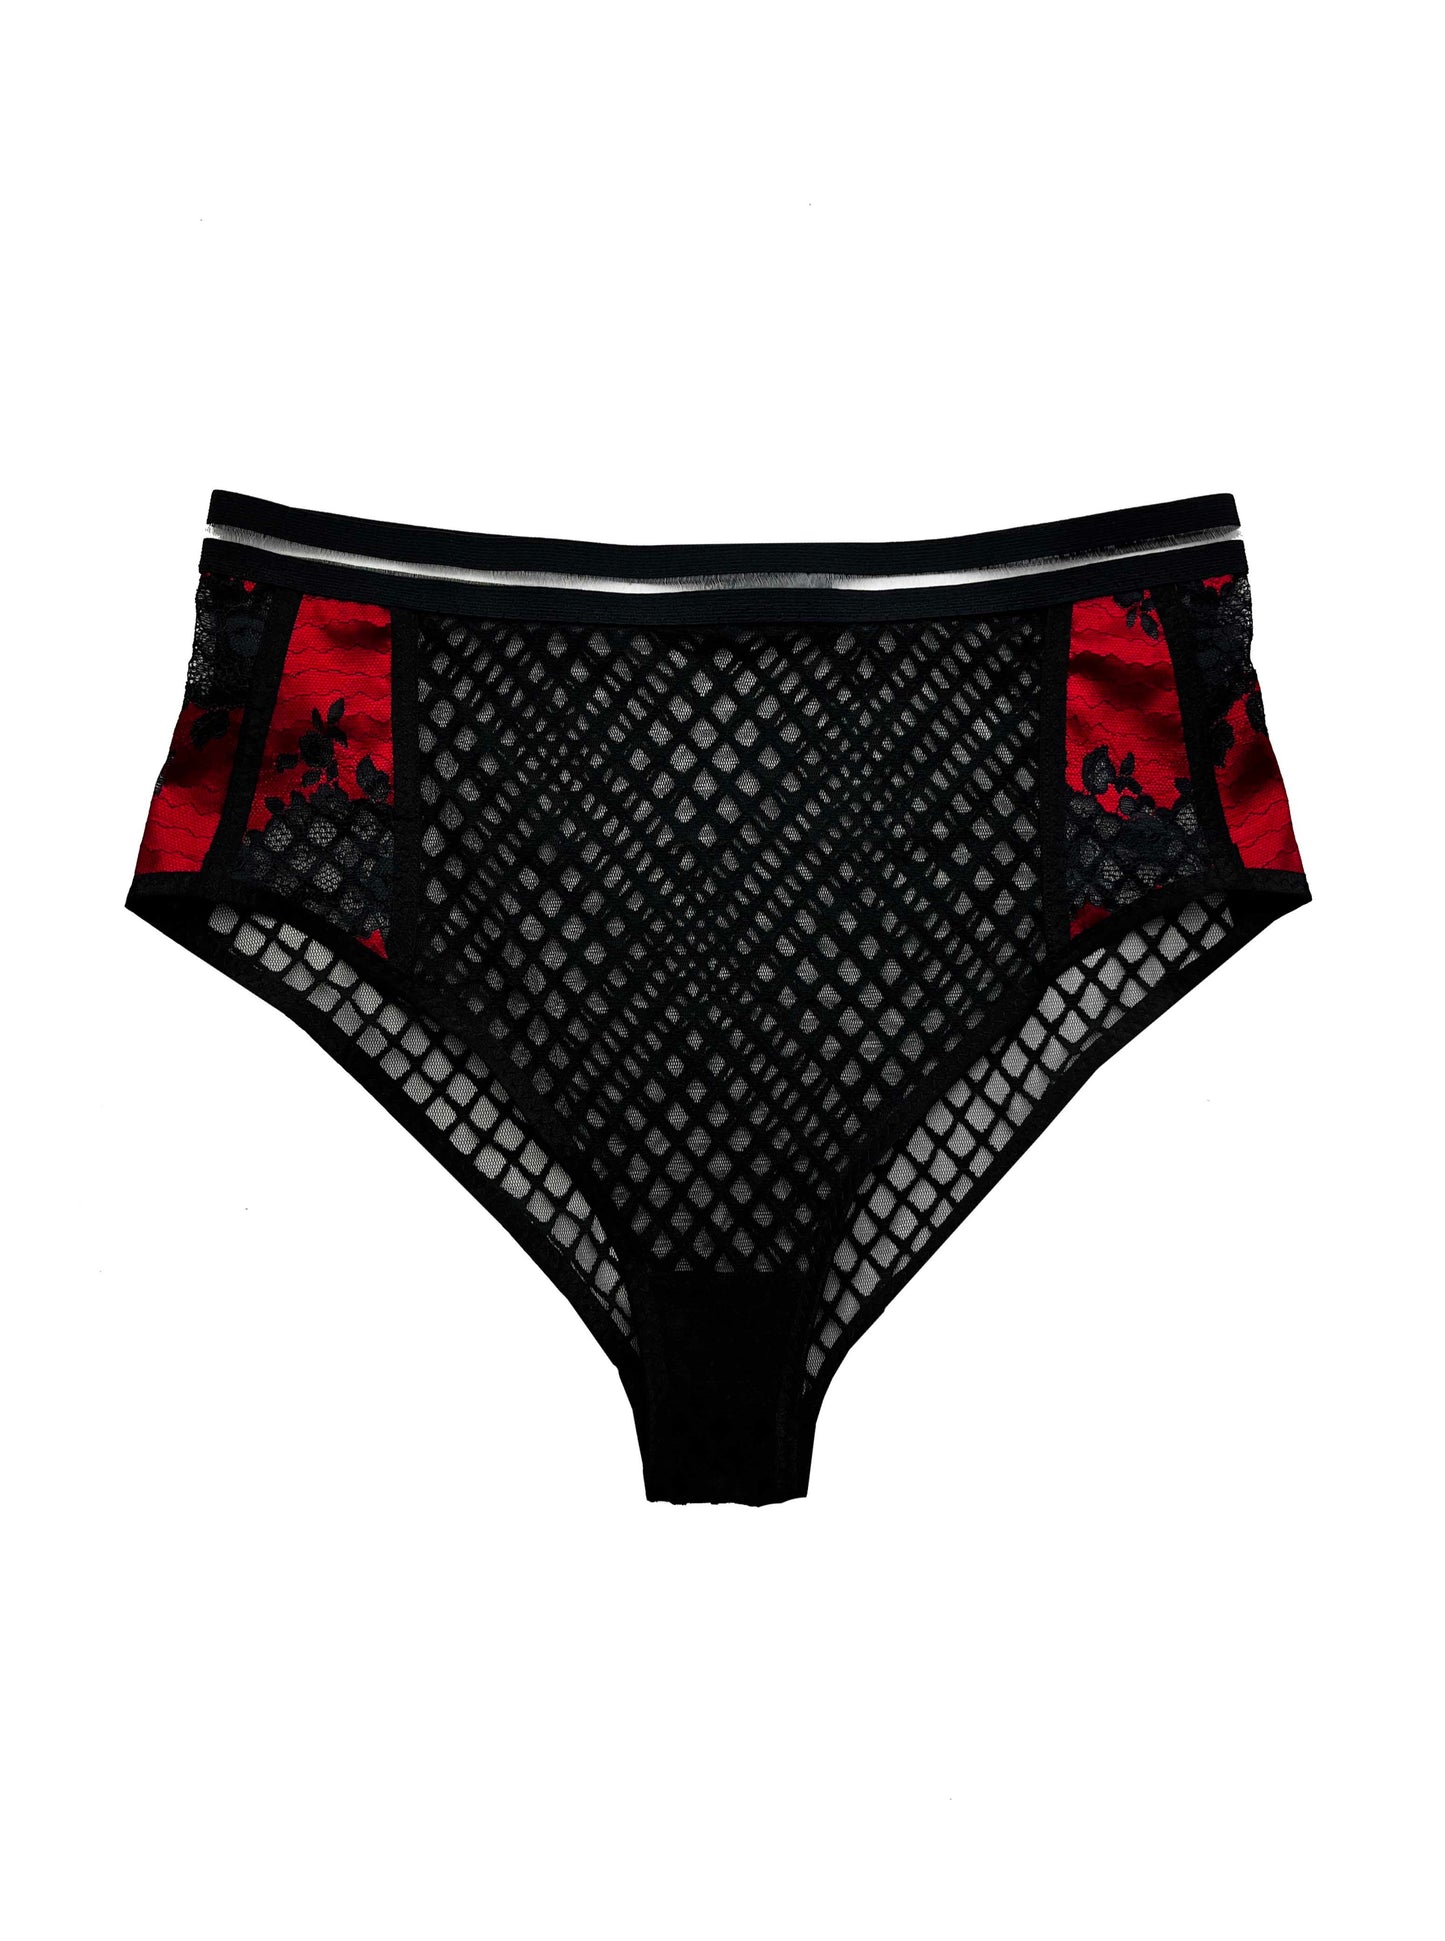 high waisted red and black underwear against a white backdrop